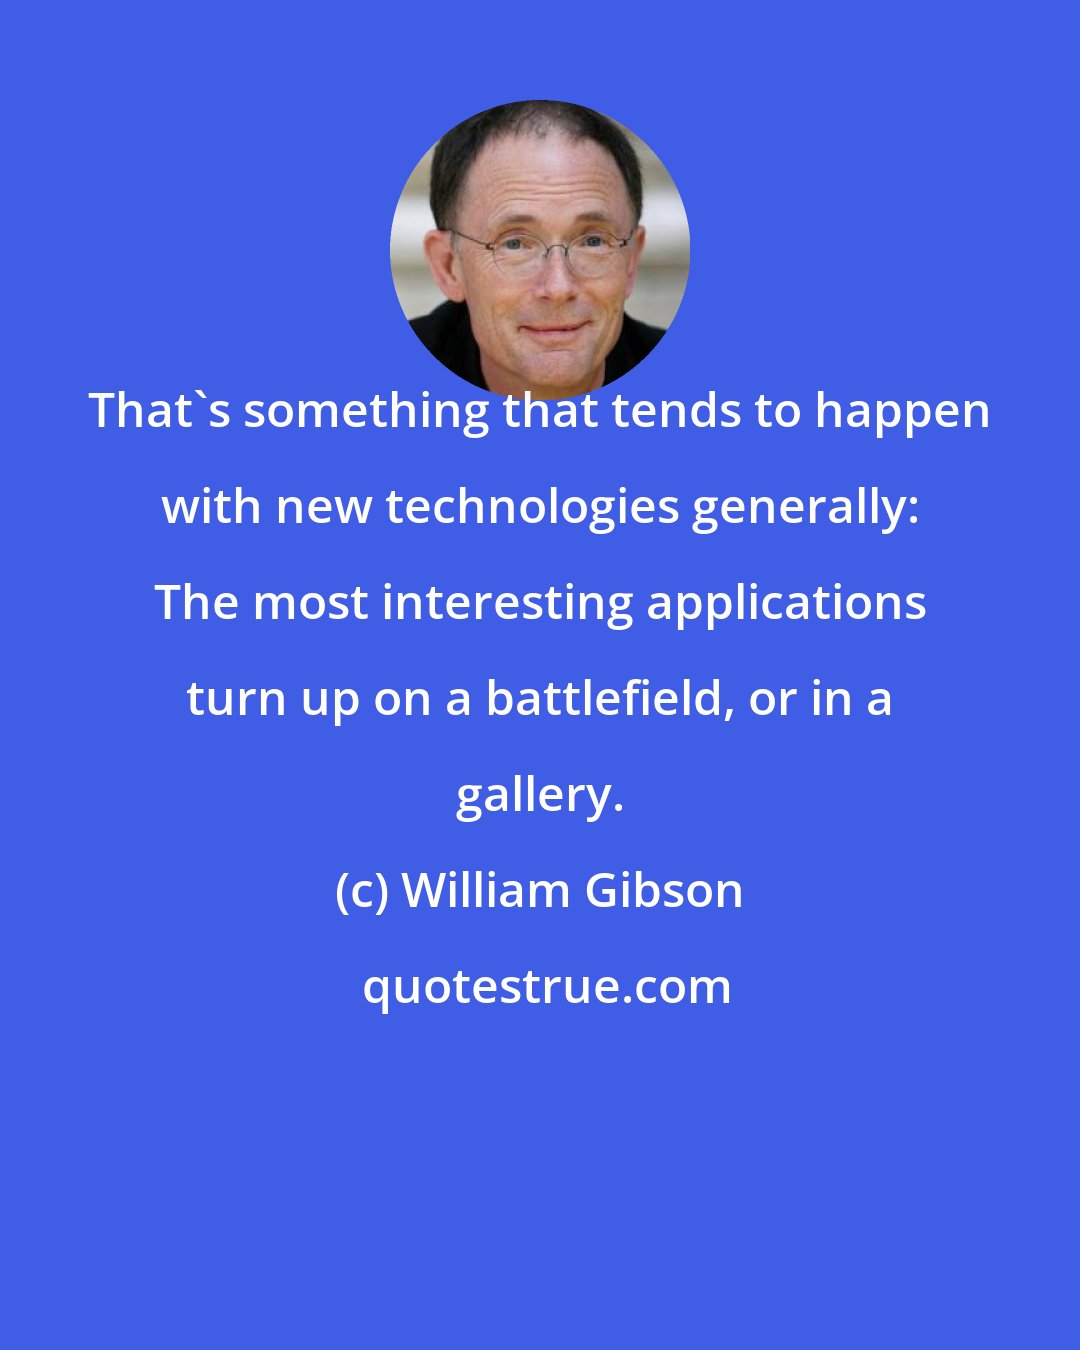 William Gibson: That's something that tends to happen with new technologies generally: The most interesting applications turn up on a battlefield, or in a gallery.